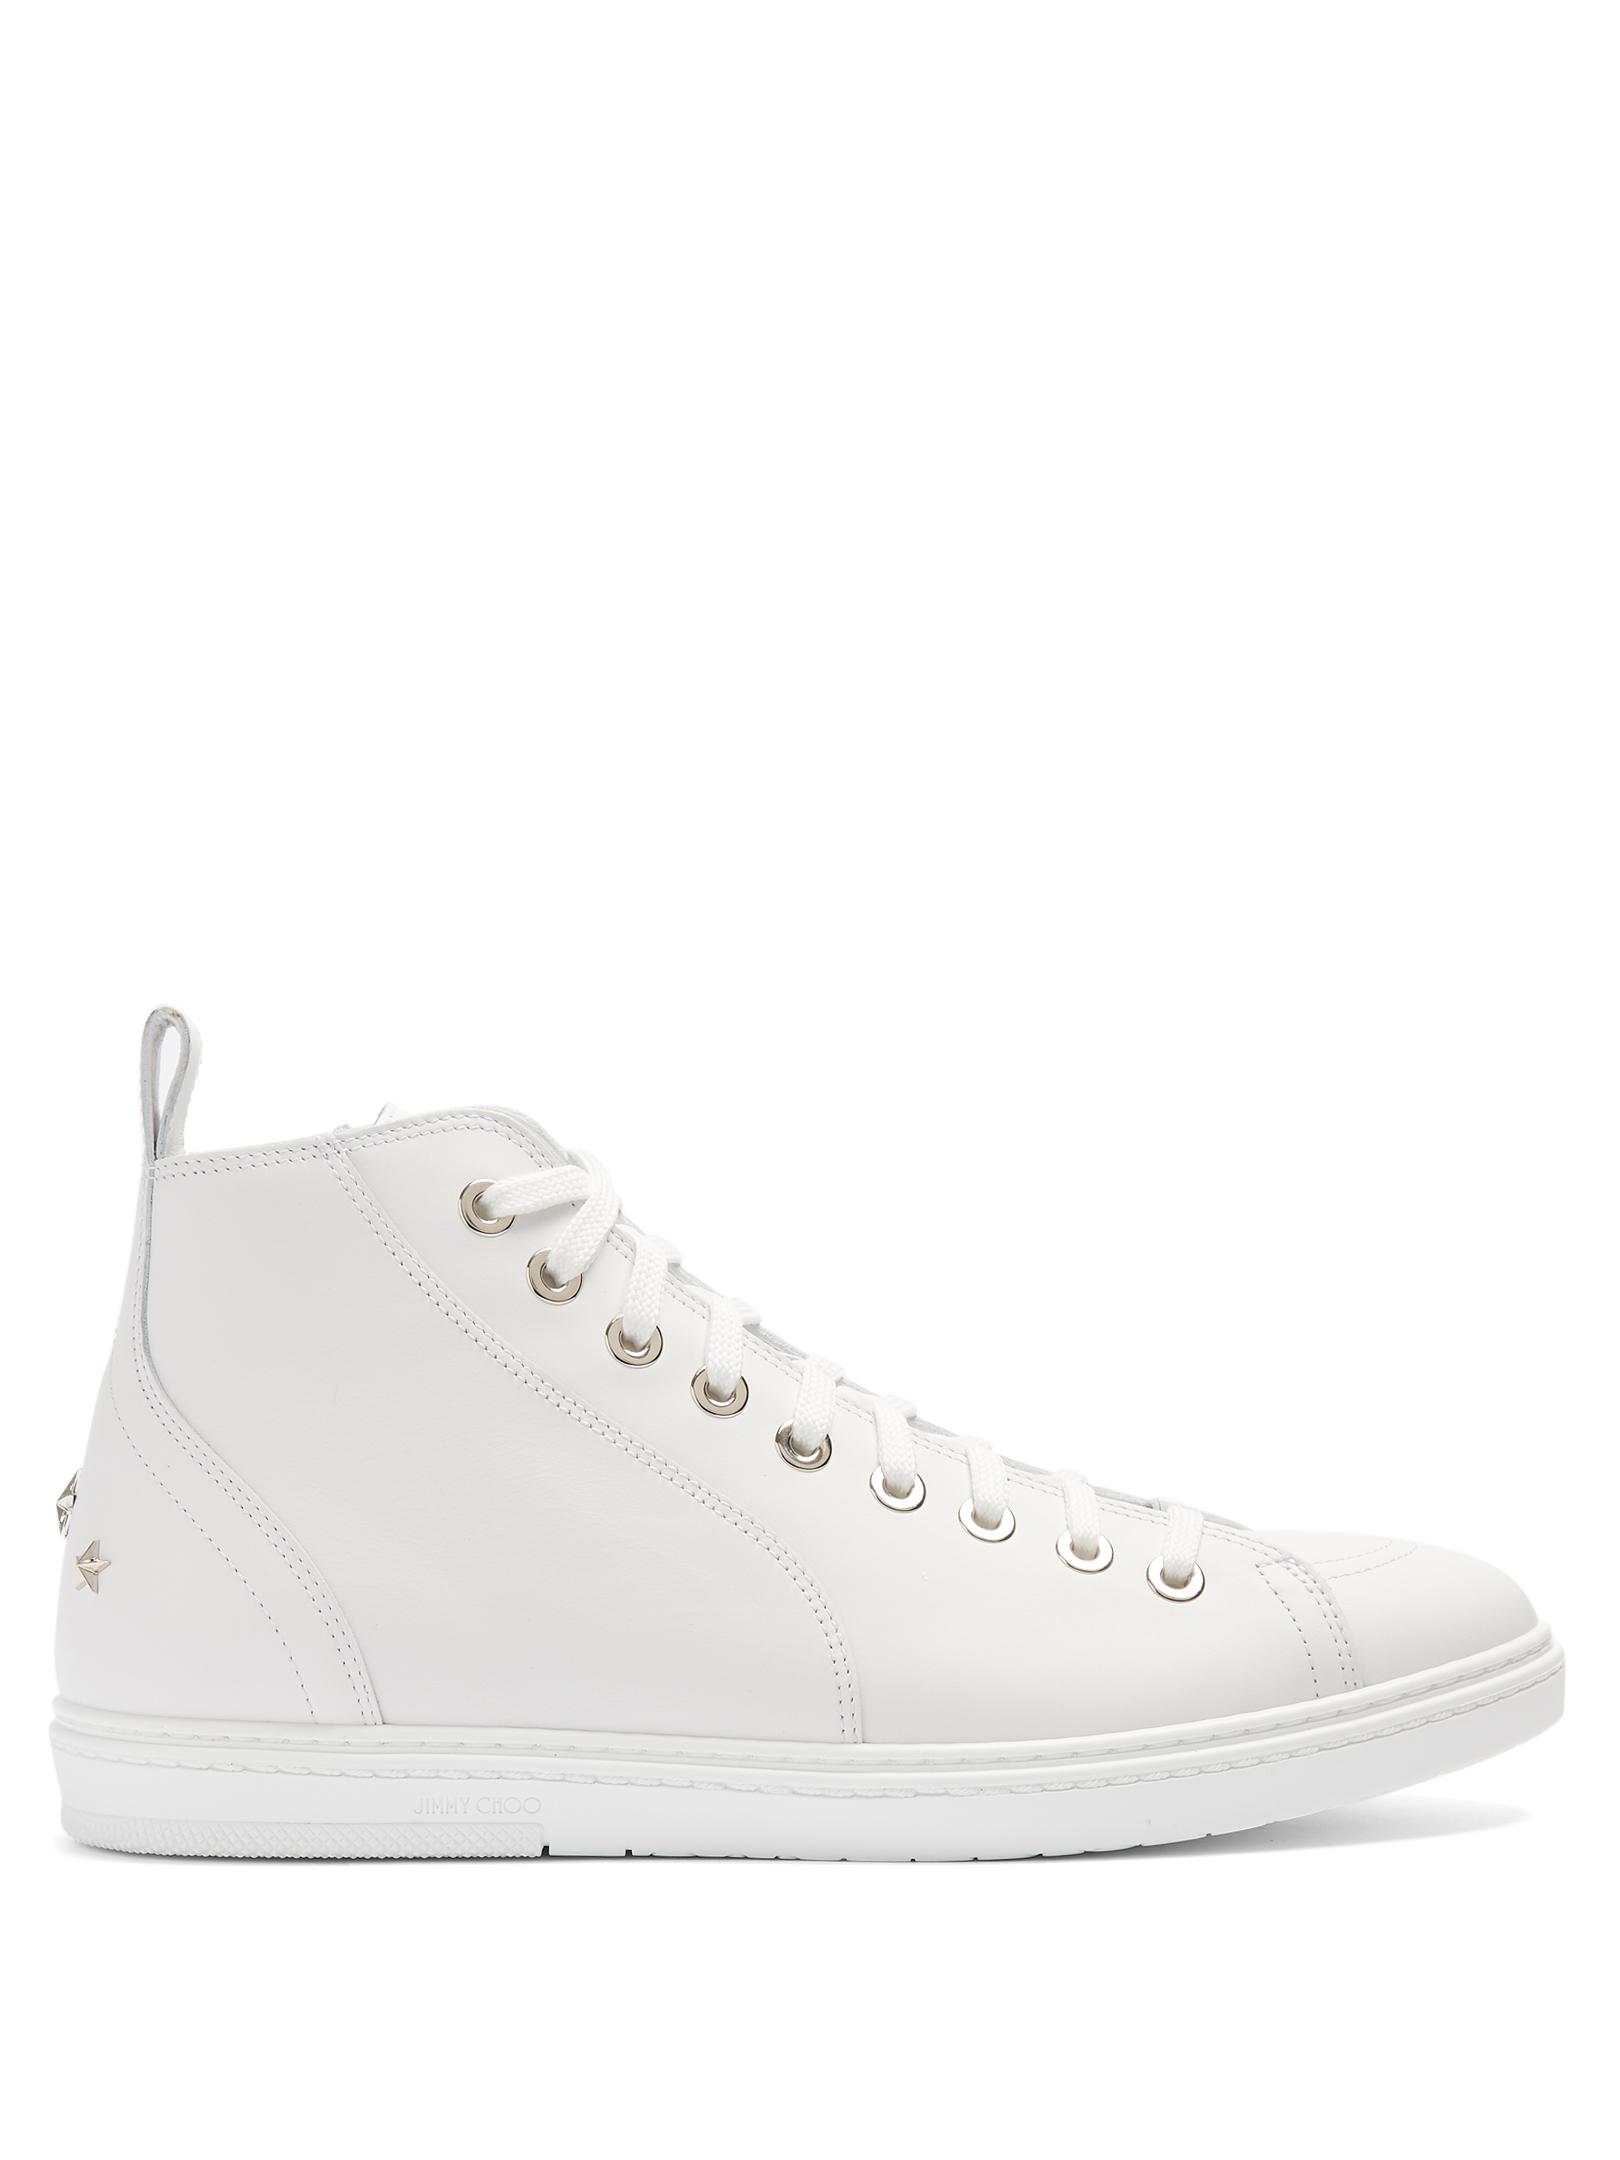 Jimmy Choo Colt High-top Leather Trainers in White for Men | Lyst